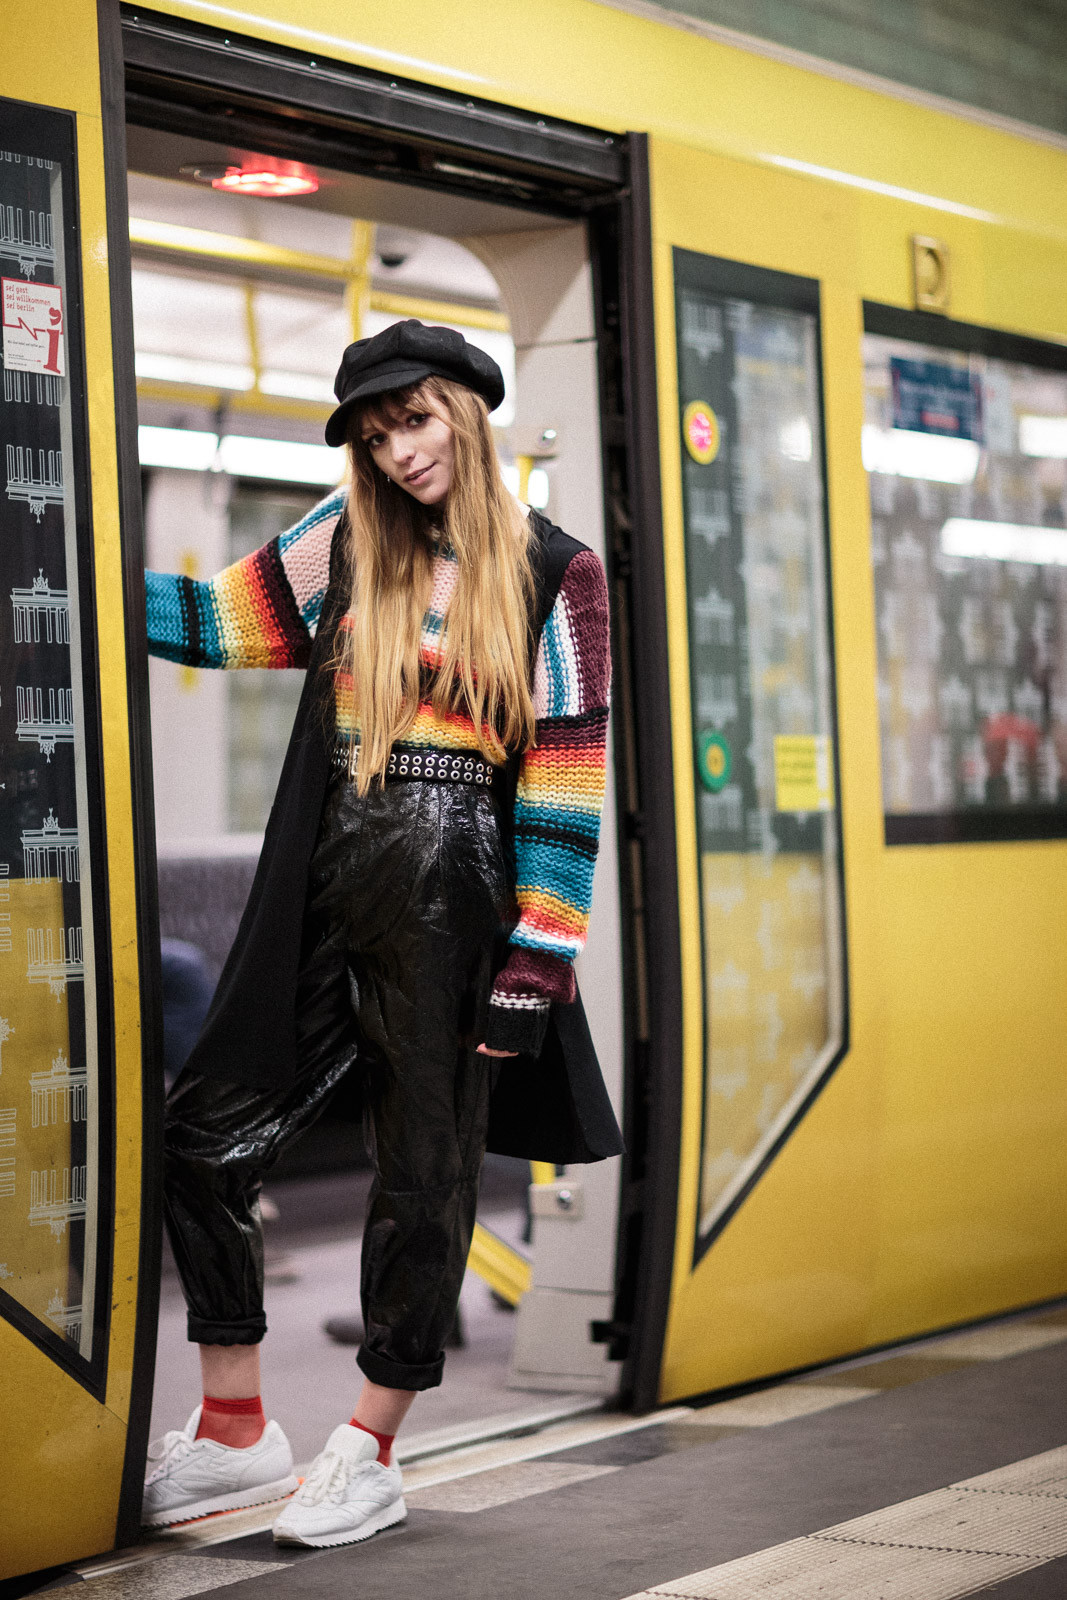 girl with hippie outfit in berlin subway